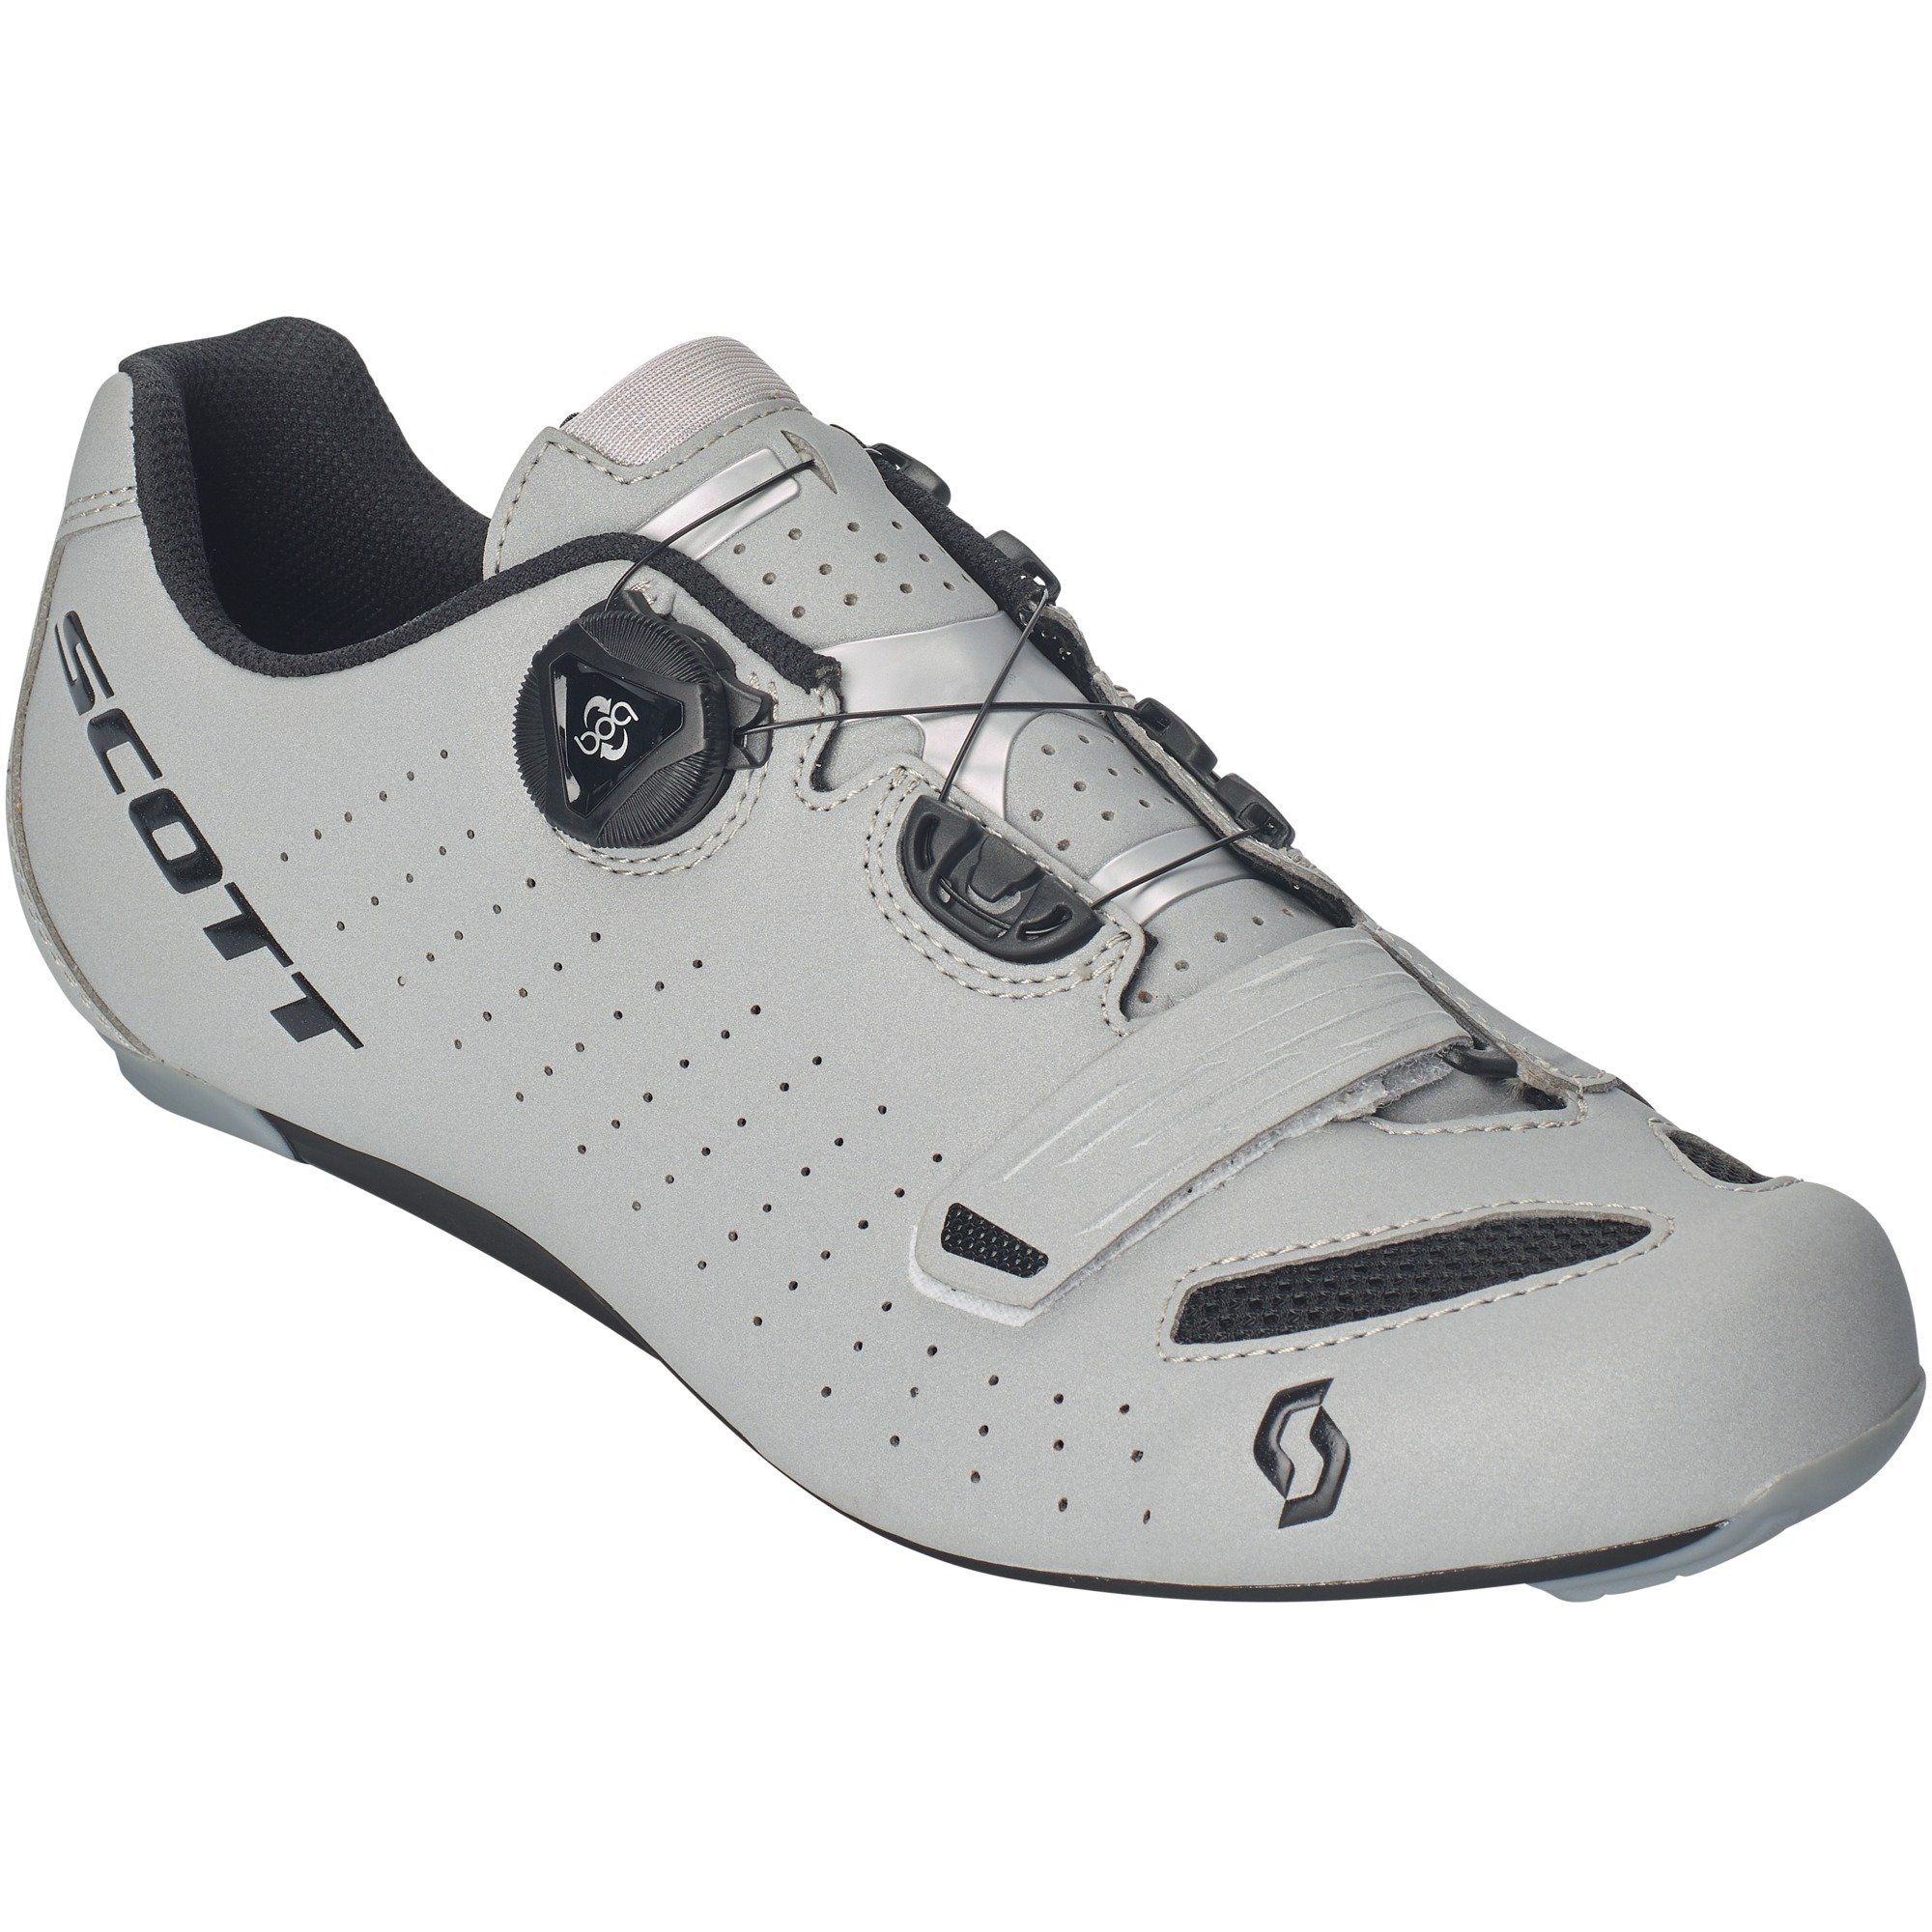 cycling shoes boa system